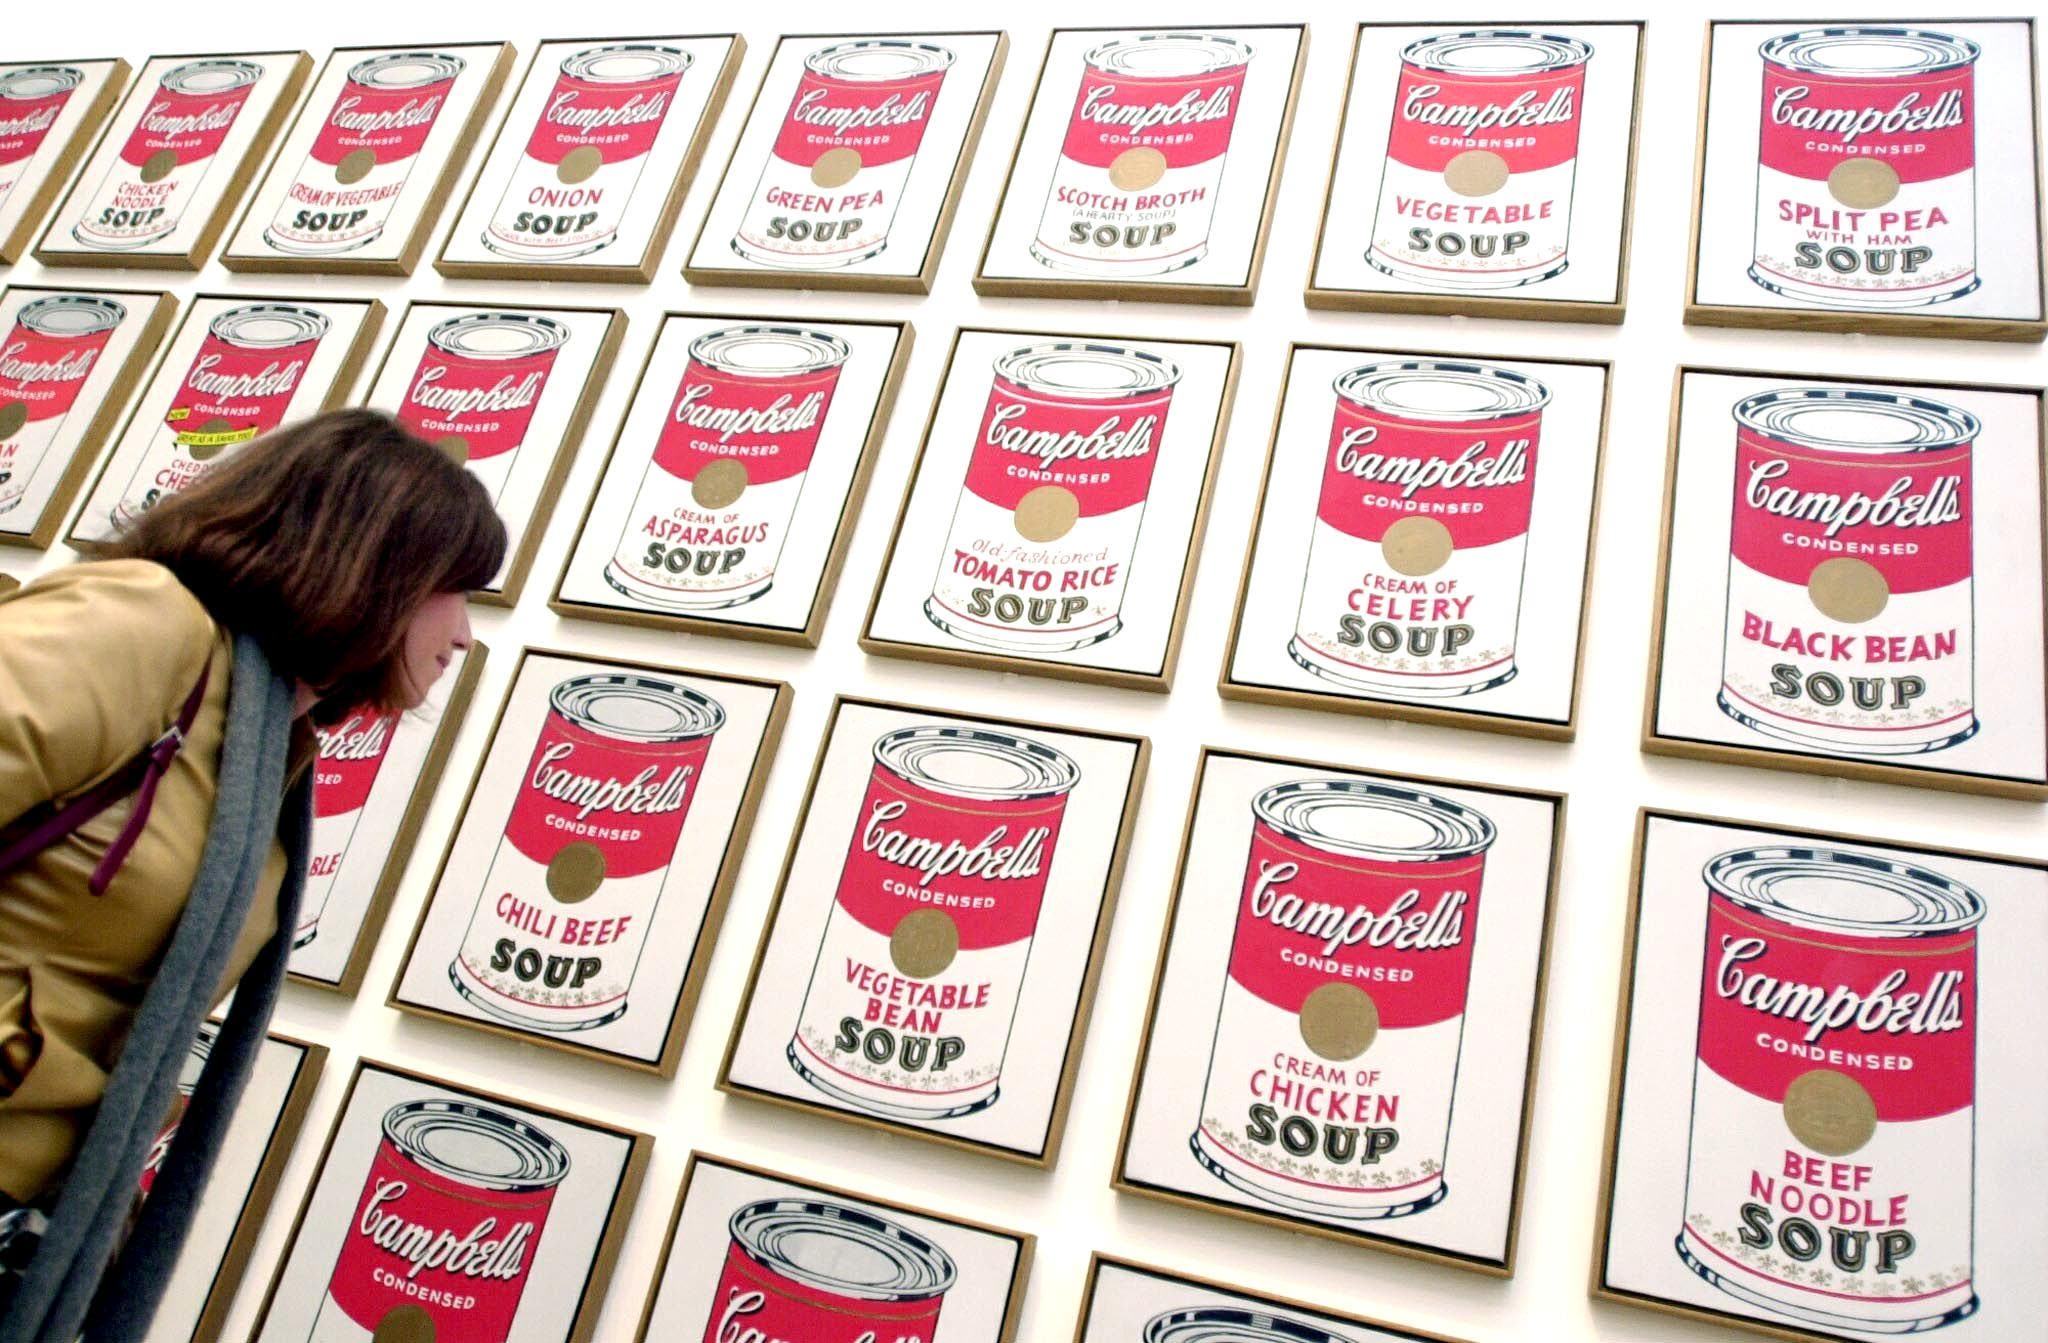 A visitor looks at enigmatic American artist Andy Warhol's "Campbell's Soup Cans" at the Tate Modern in London 05 February 2002. A major retrospective of the controversial Warhol's work is expected to be a highlight of the English capital's cultural year. AFP PHOTO/Nicolas ASFOURI / AFP / NICOLAS ASFOURI (Photo credit should read NICOLAS ASFOURI/AFP via Getty Images)